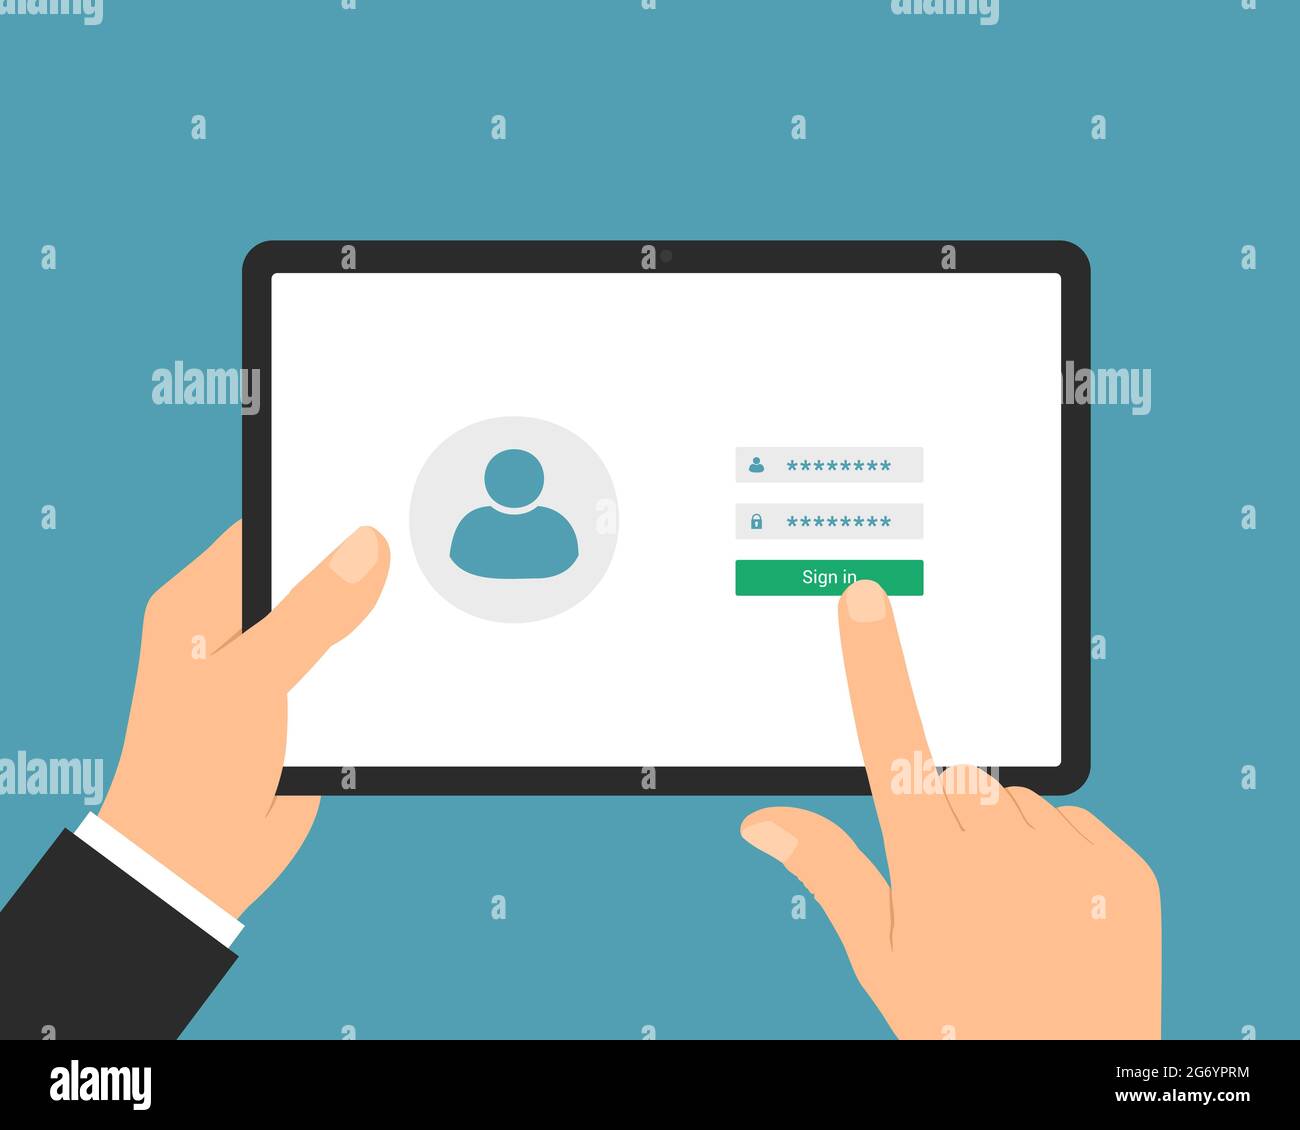 Flat design illustration of manager or business hand use digital tablet with touch screen login. Entering username and password - vector Stock Vector